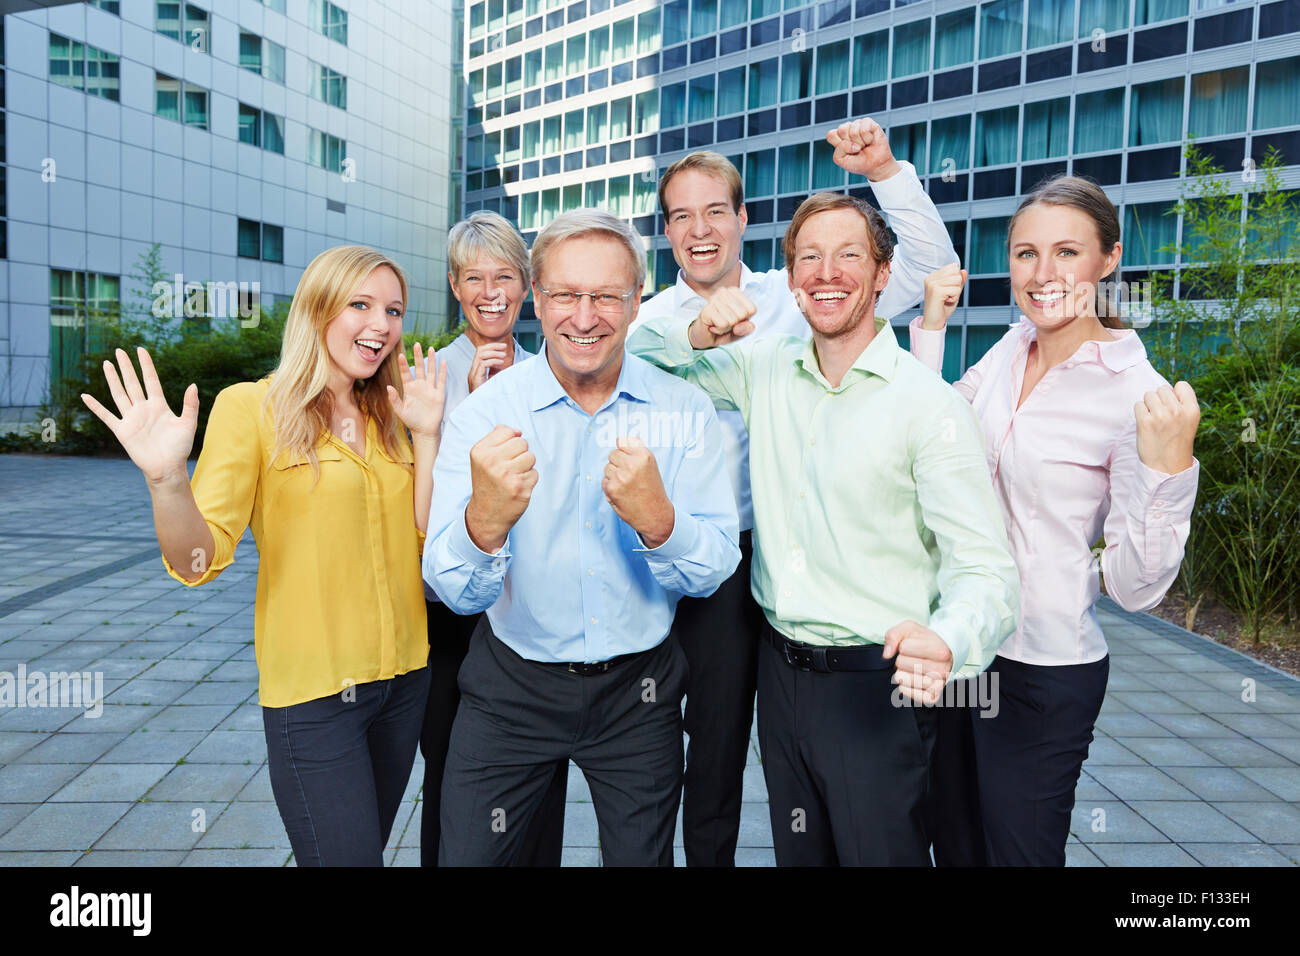 Winners cheering together with their clenched fists in a business team Stock Photo